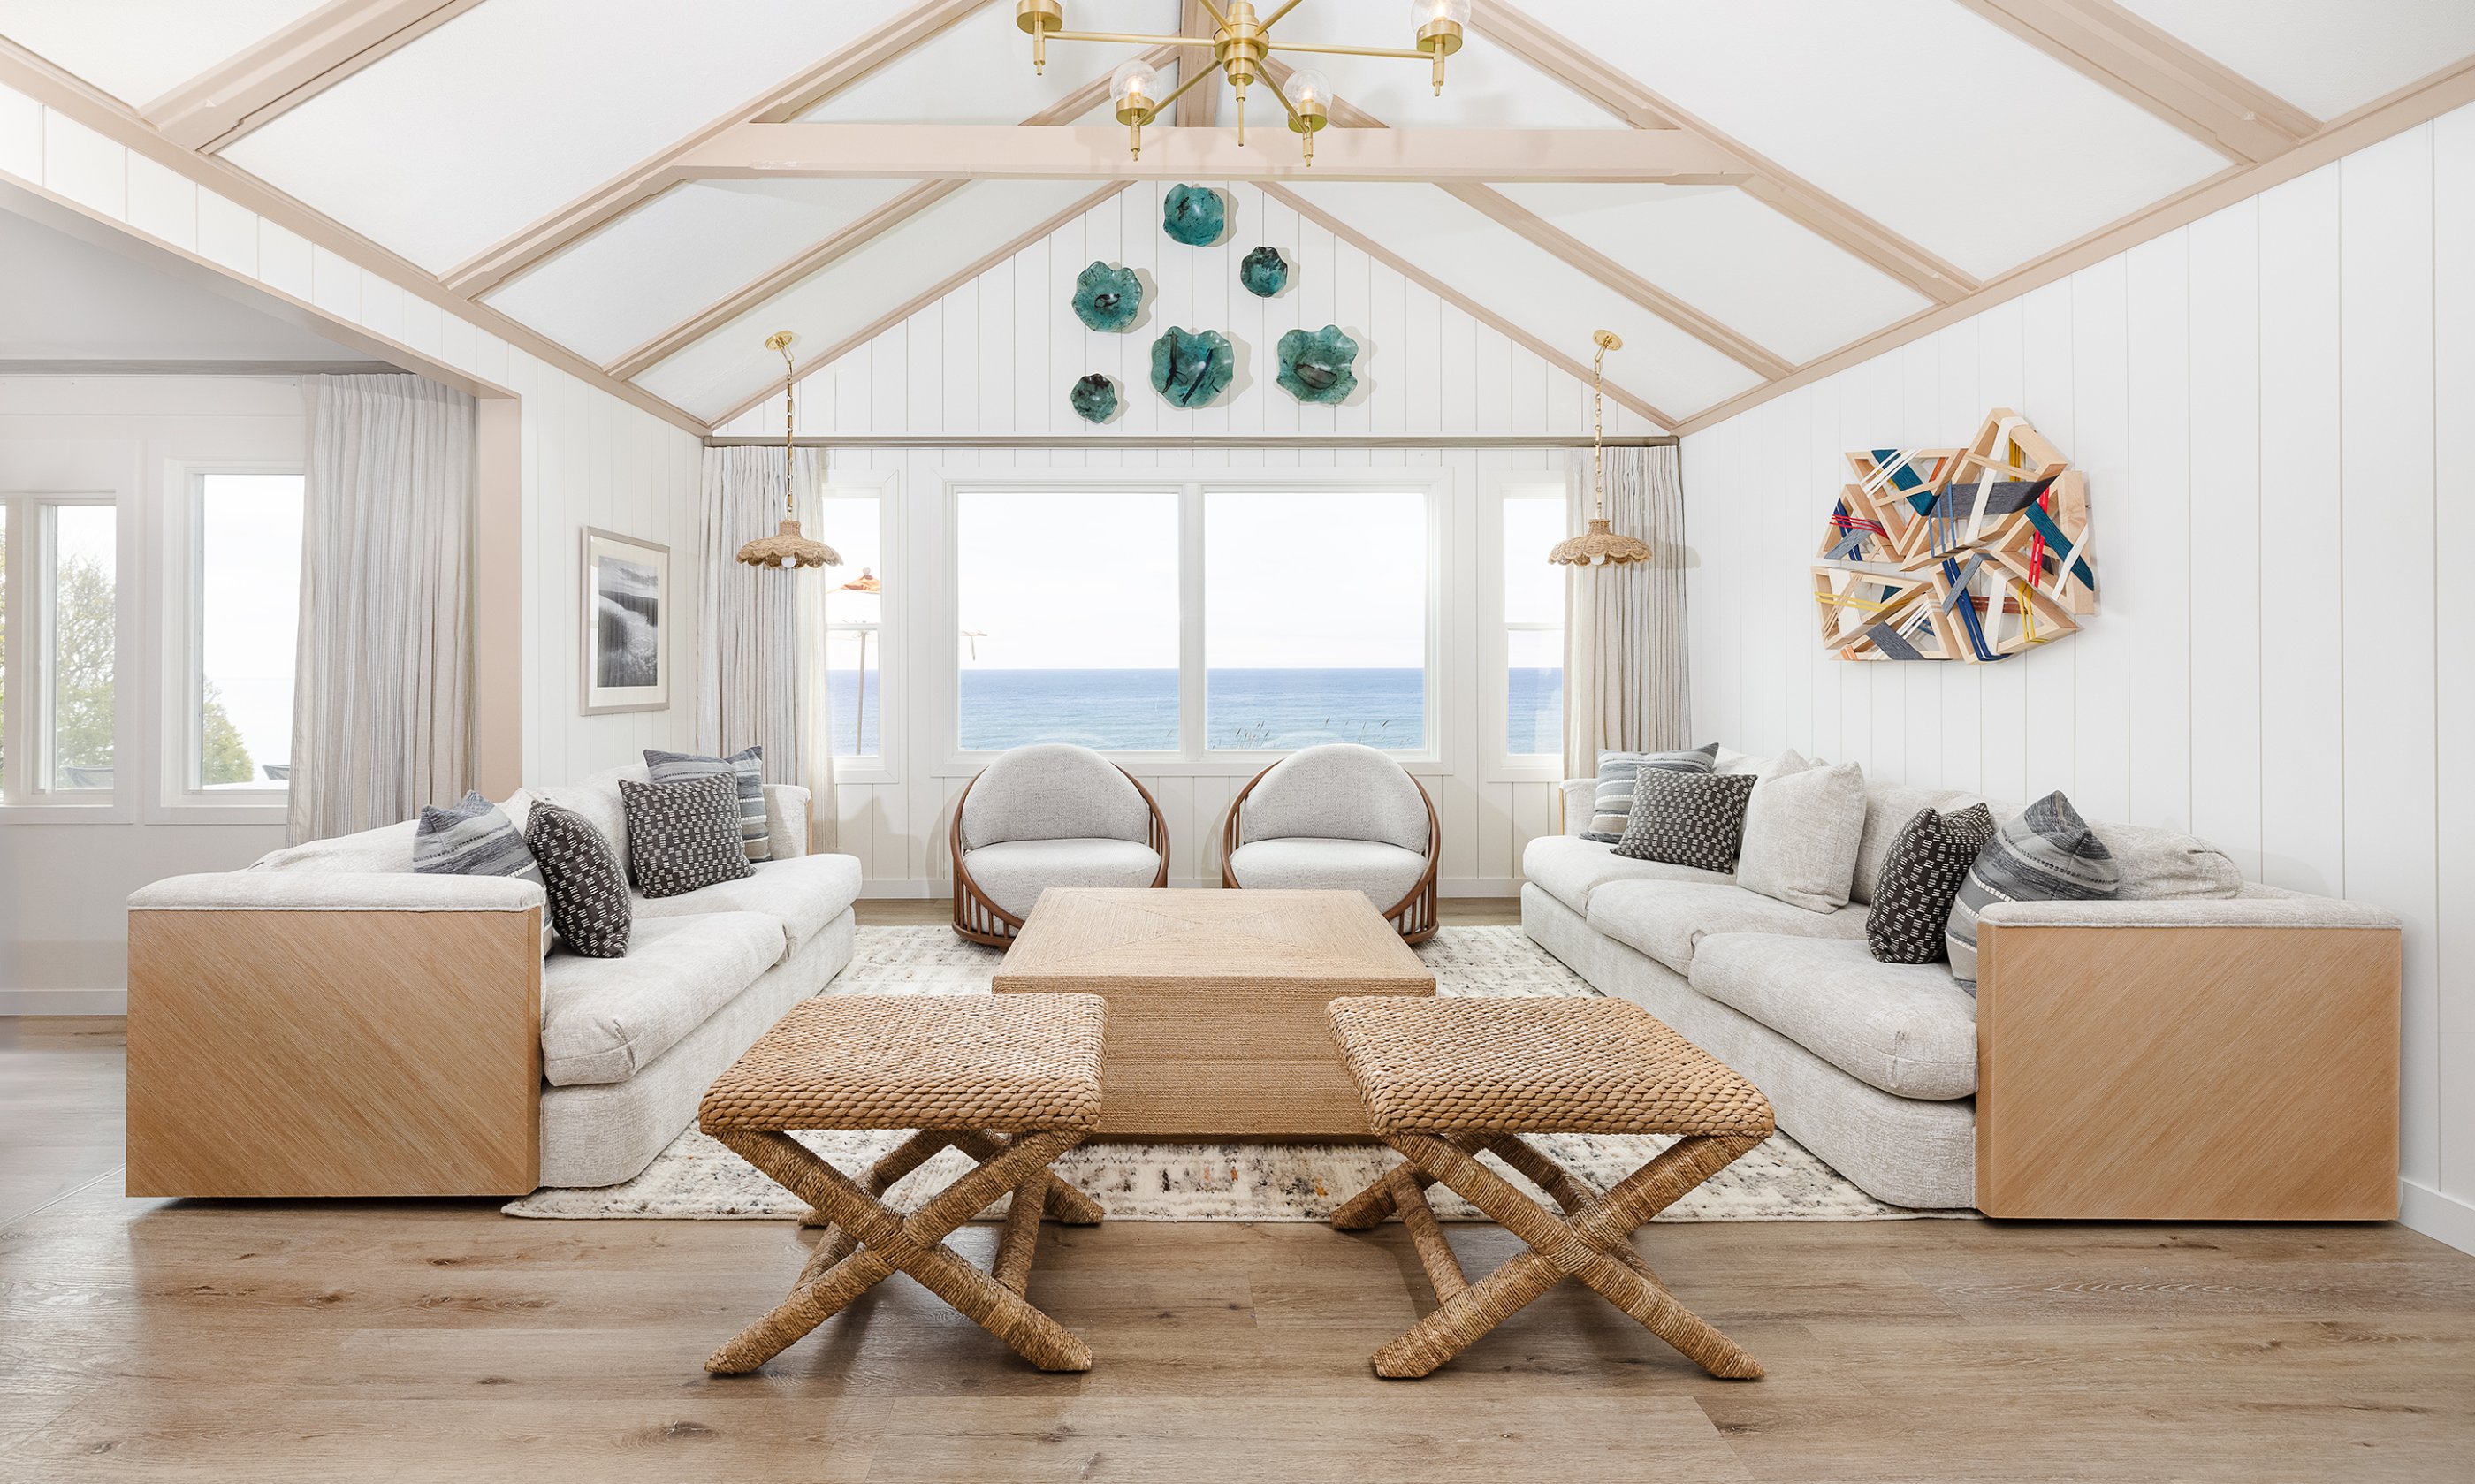 The living in the Ocean View Three Bedroom Cottage at Gurney's Montauk Resort